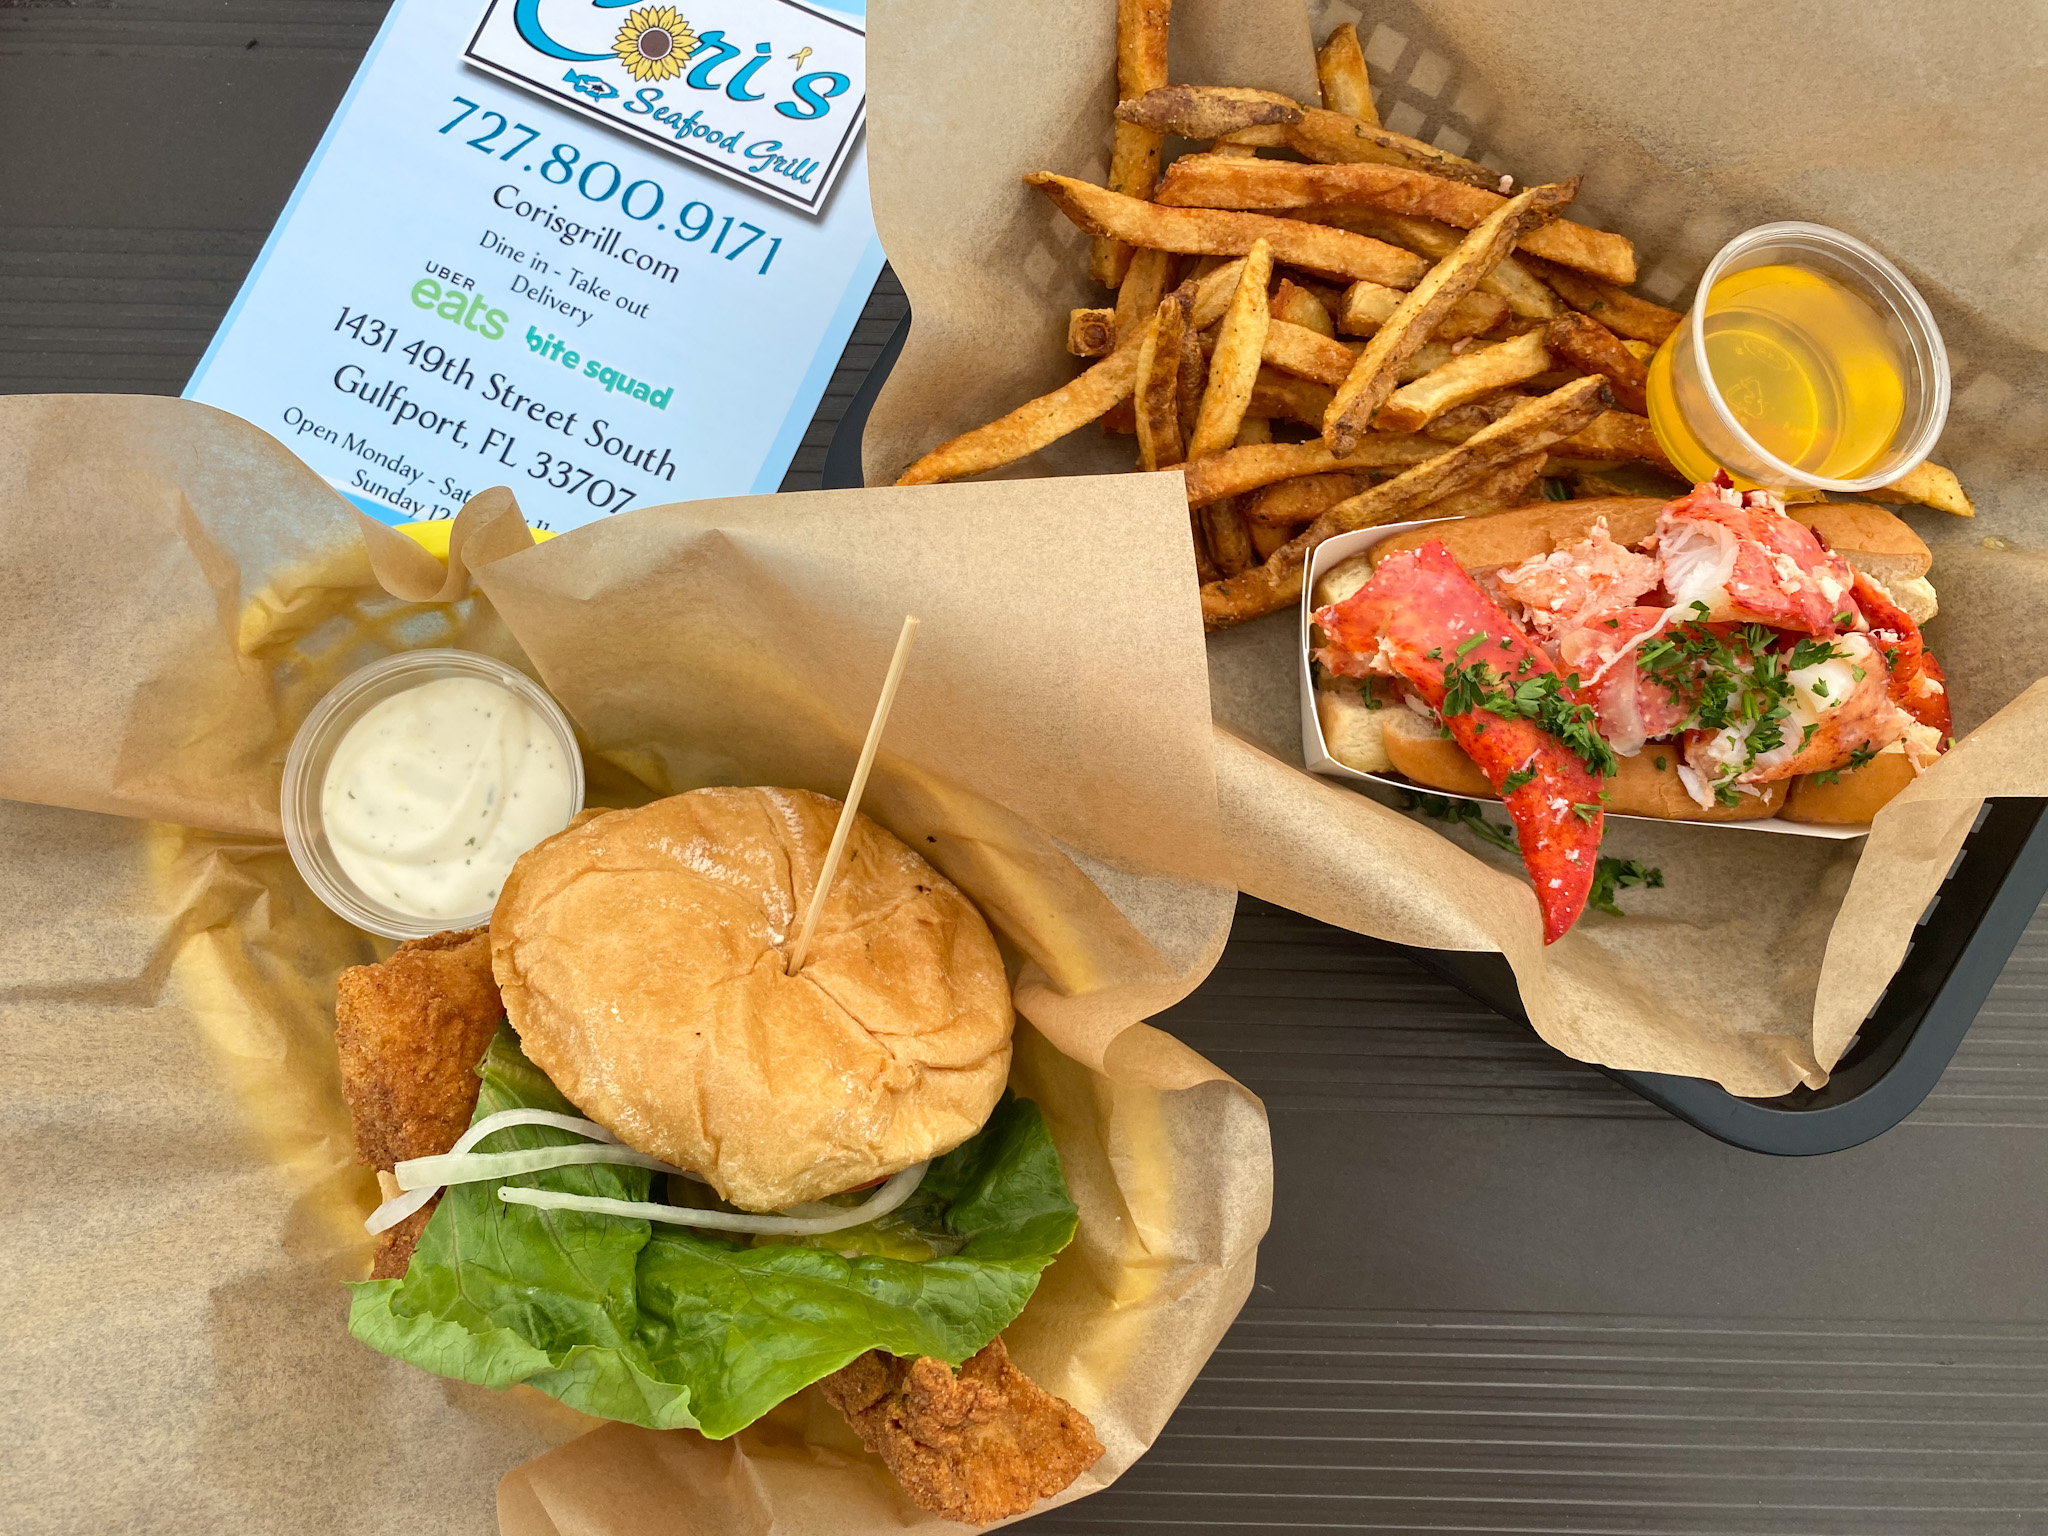 Fried Grouper Sandwich and the Lobster Roll